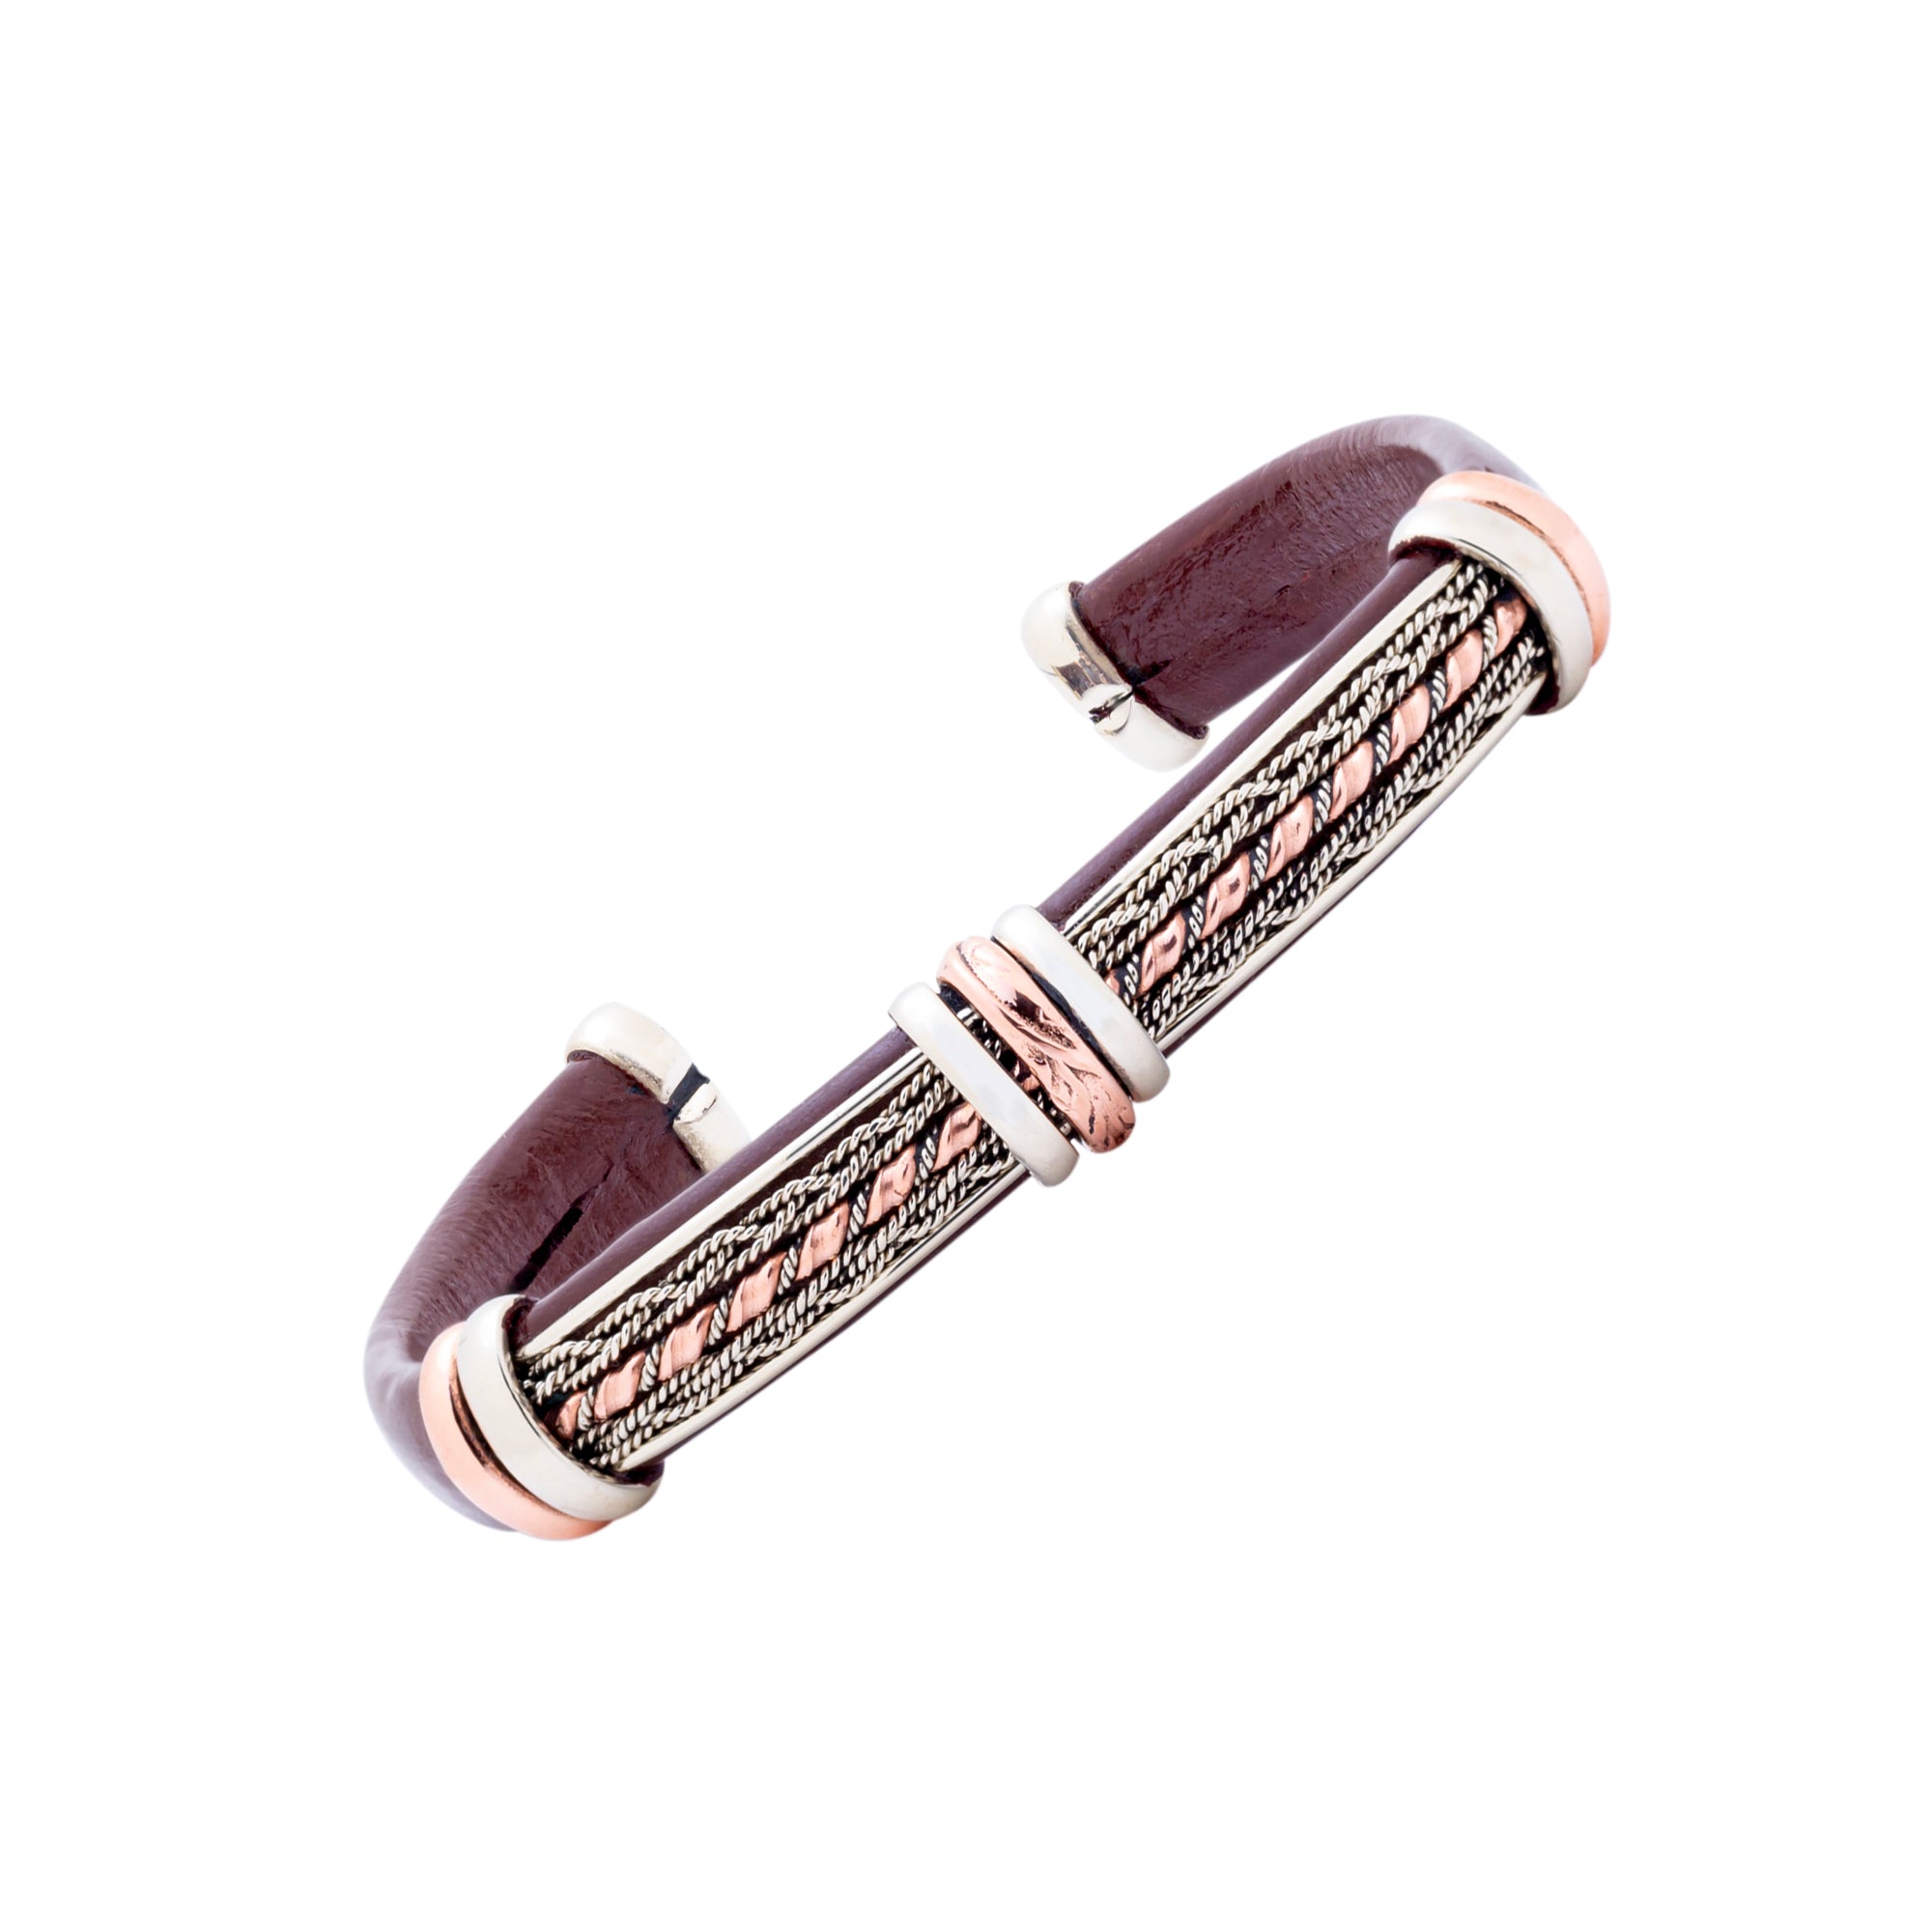 Leather Bracelet BR.ULB.0302 - Brown Leather Cuff Bracelet -Handcrafted by HPSilver, LLC.